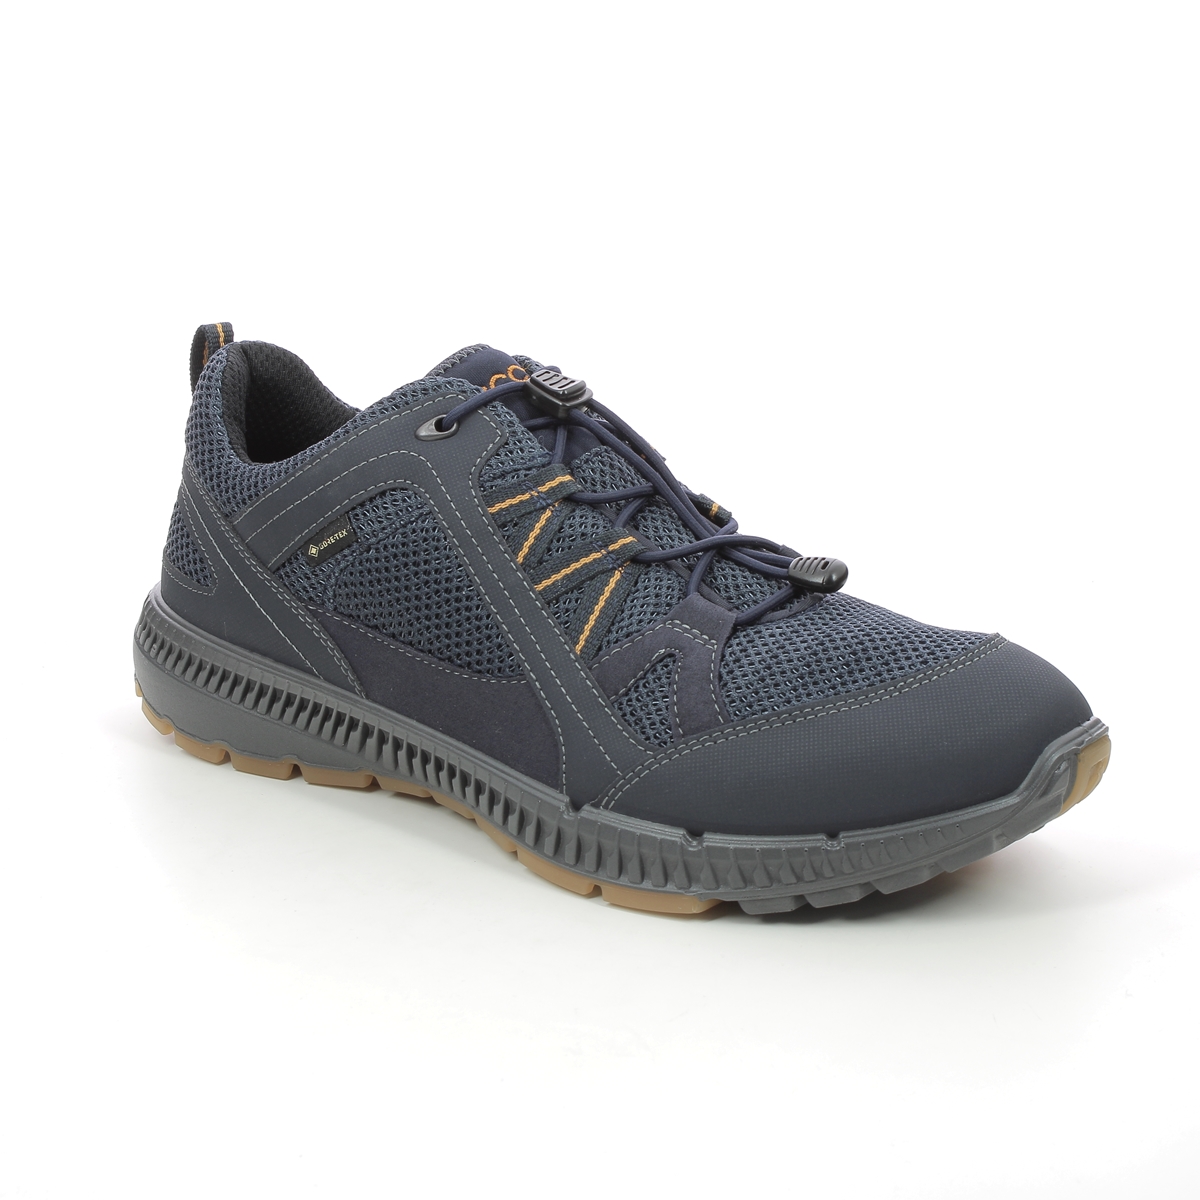 Ecco Terracruise Gtx Navy Mens Trainers 843064-51241 In Size 46 In Plain Navy